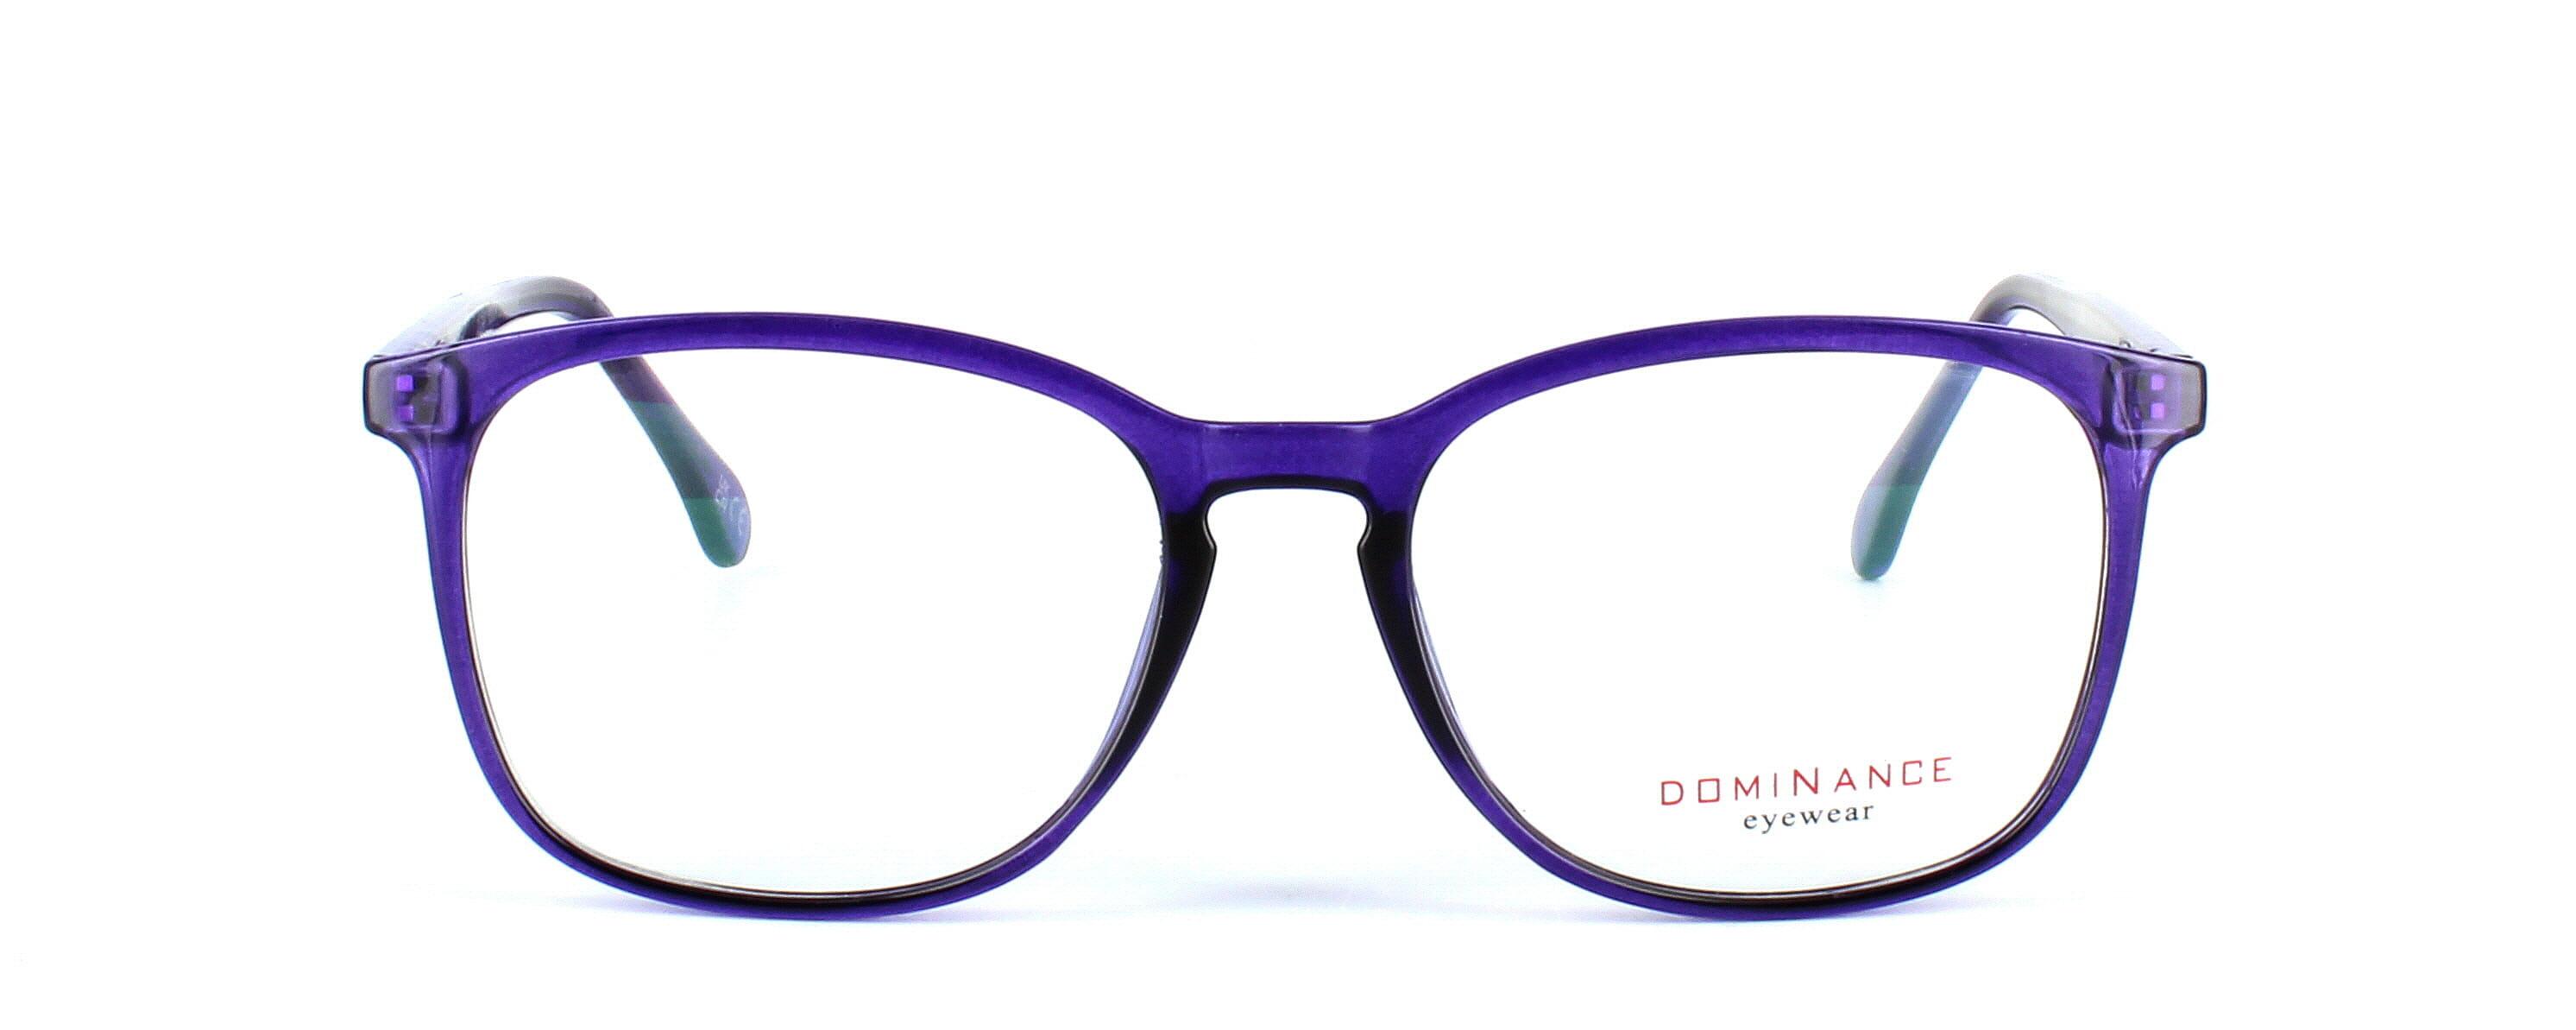 Liberty is a stylish unisex plastic glasses frame here in purple - image view 2